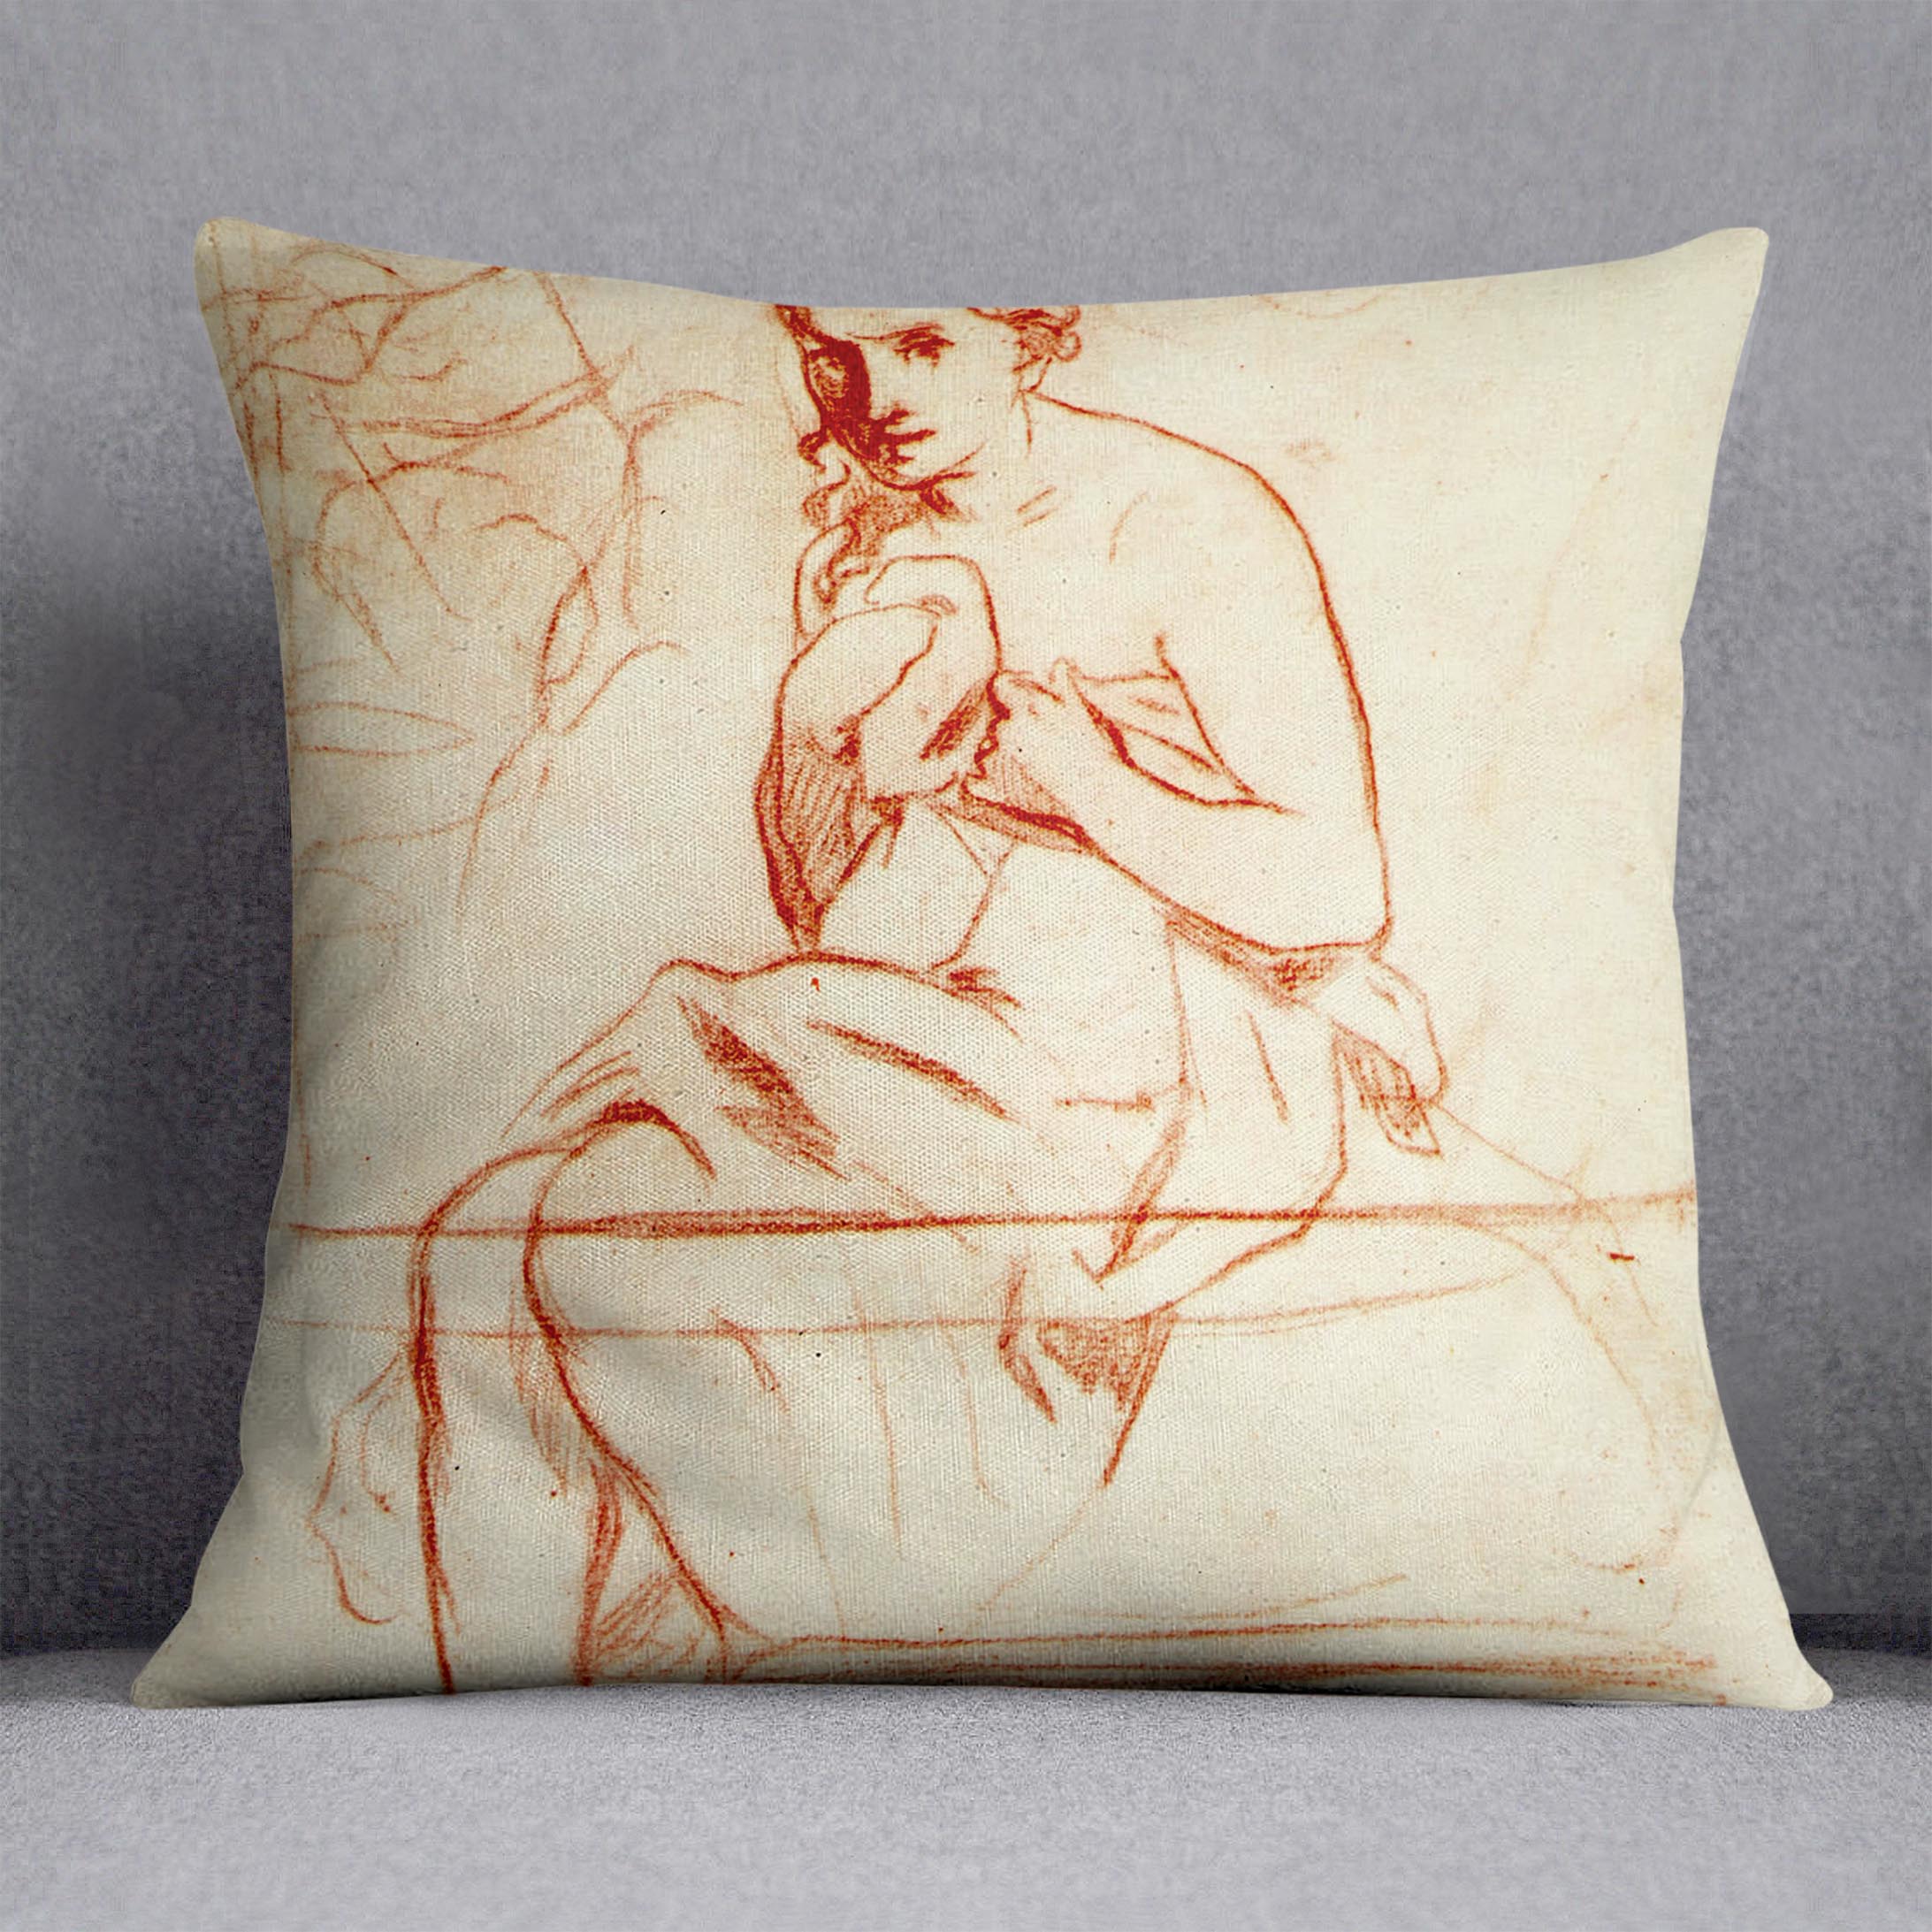 Women at the Toilet by Manet Cushion